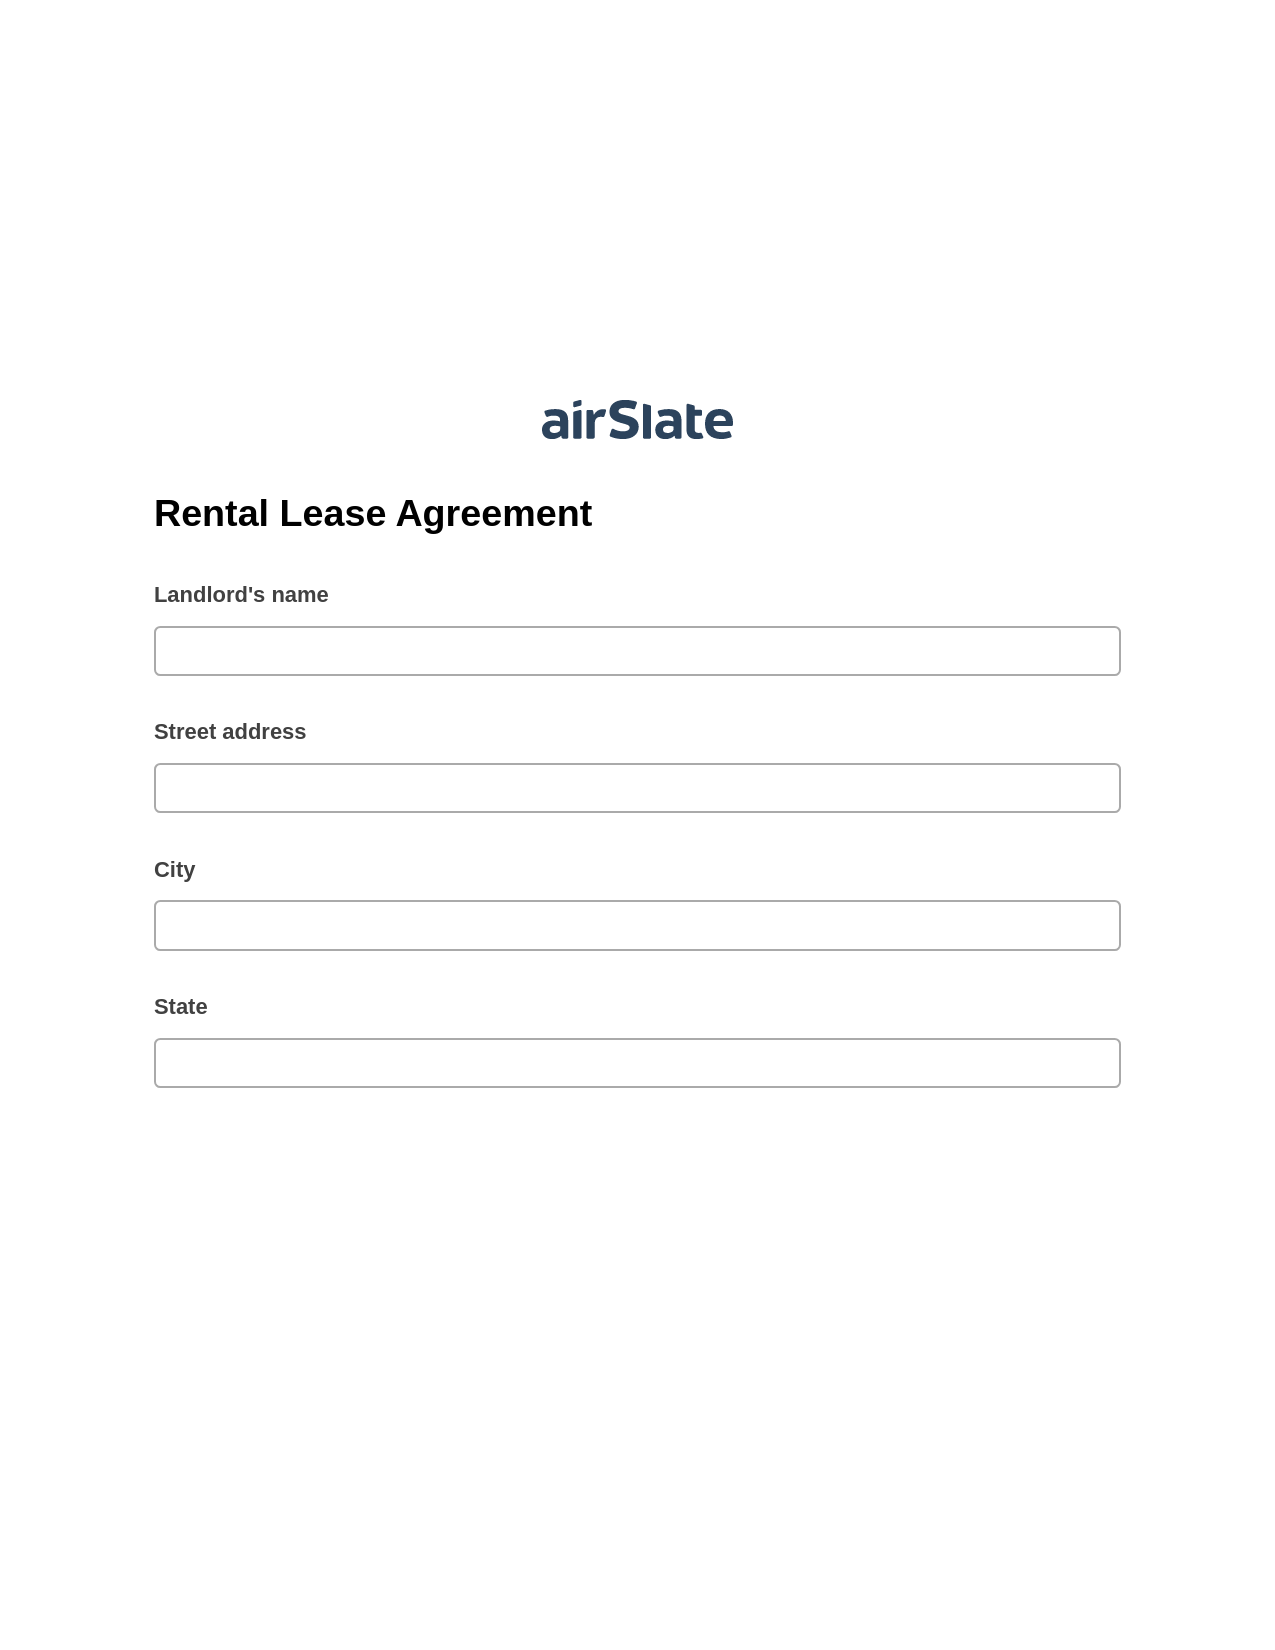 Multirole Rental Lease Agreement Pre-fill from MySQL Dropdown Options Bot, Create Slate every Google Sheet Update Bot, Export to Excel 365 Bot